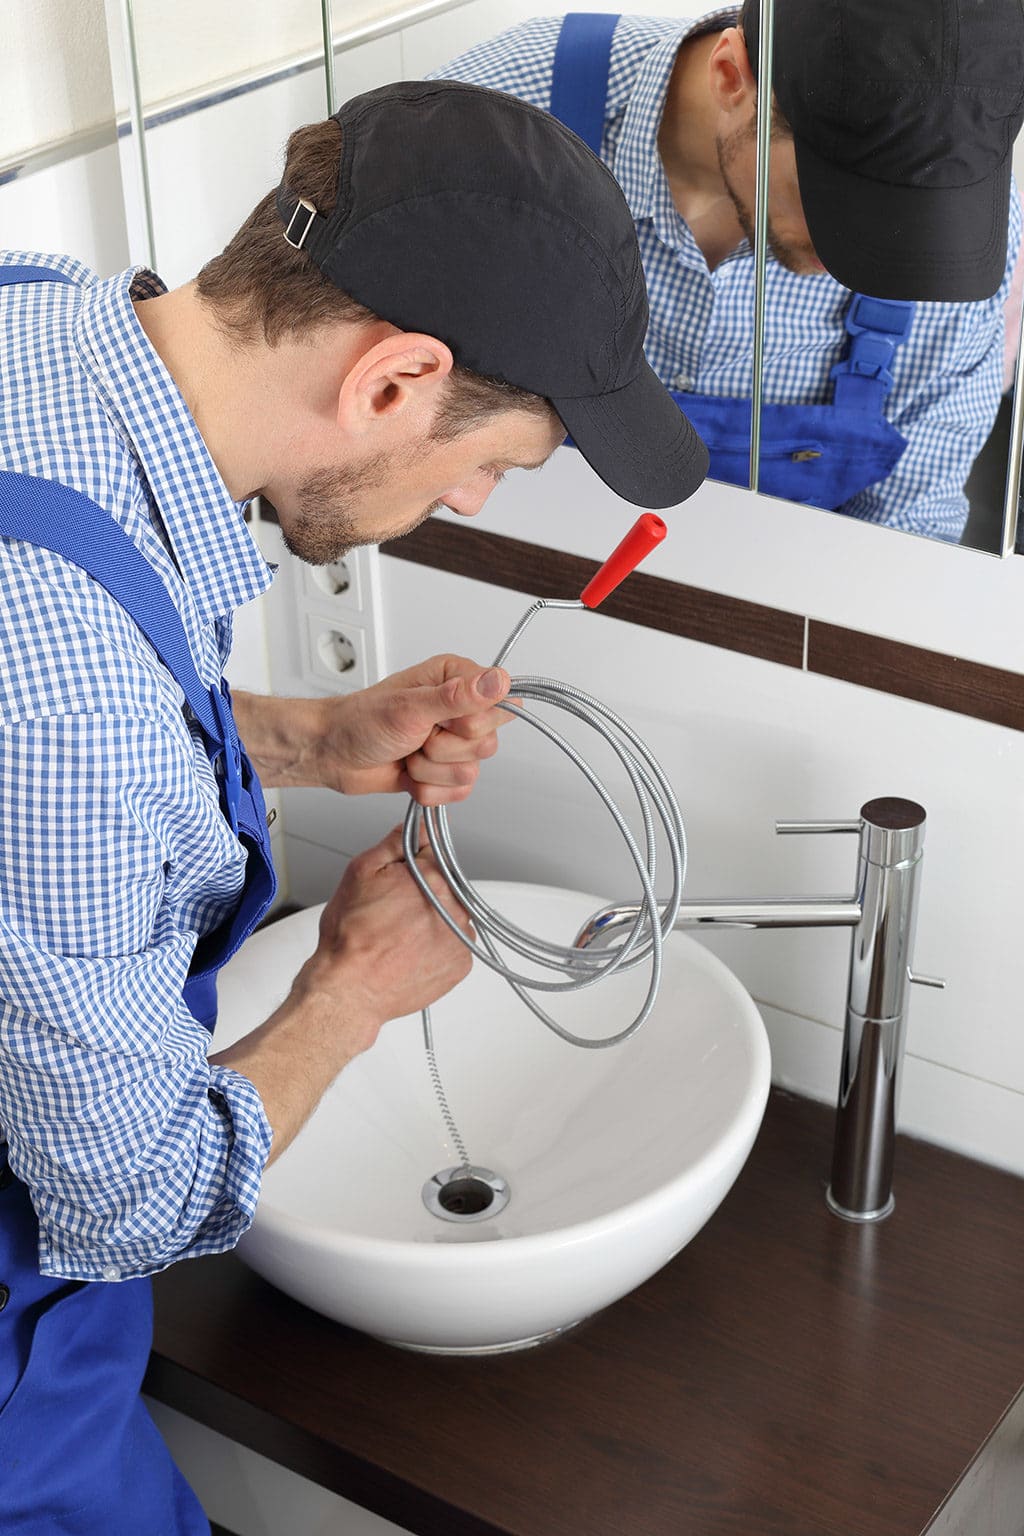 The Most Effective Solutions for Drain Cleaning in Myrtle Beach